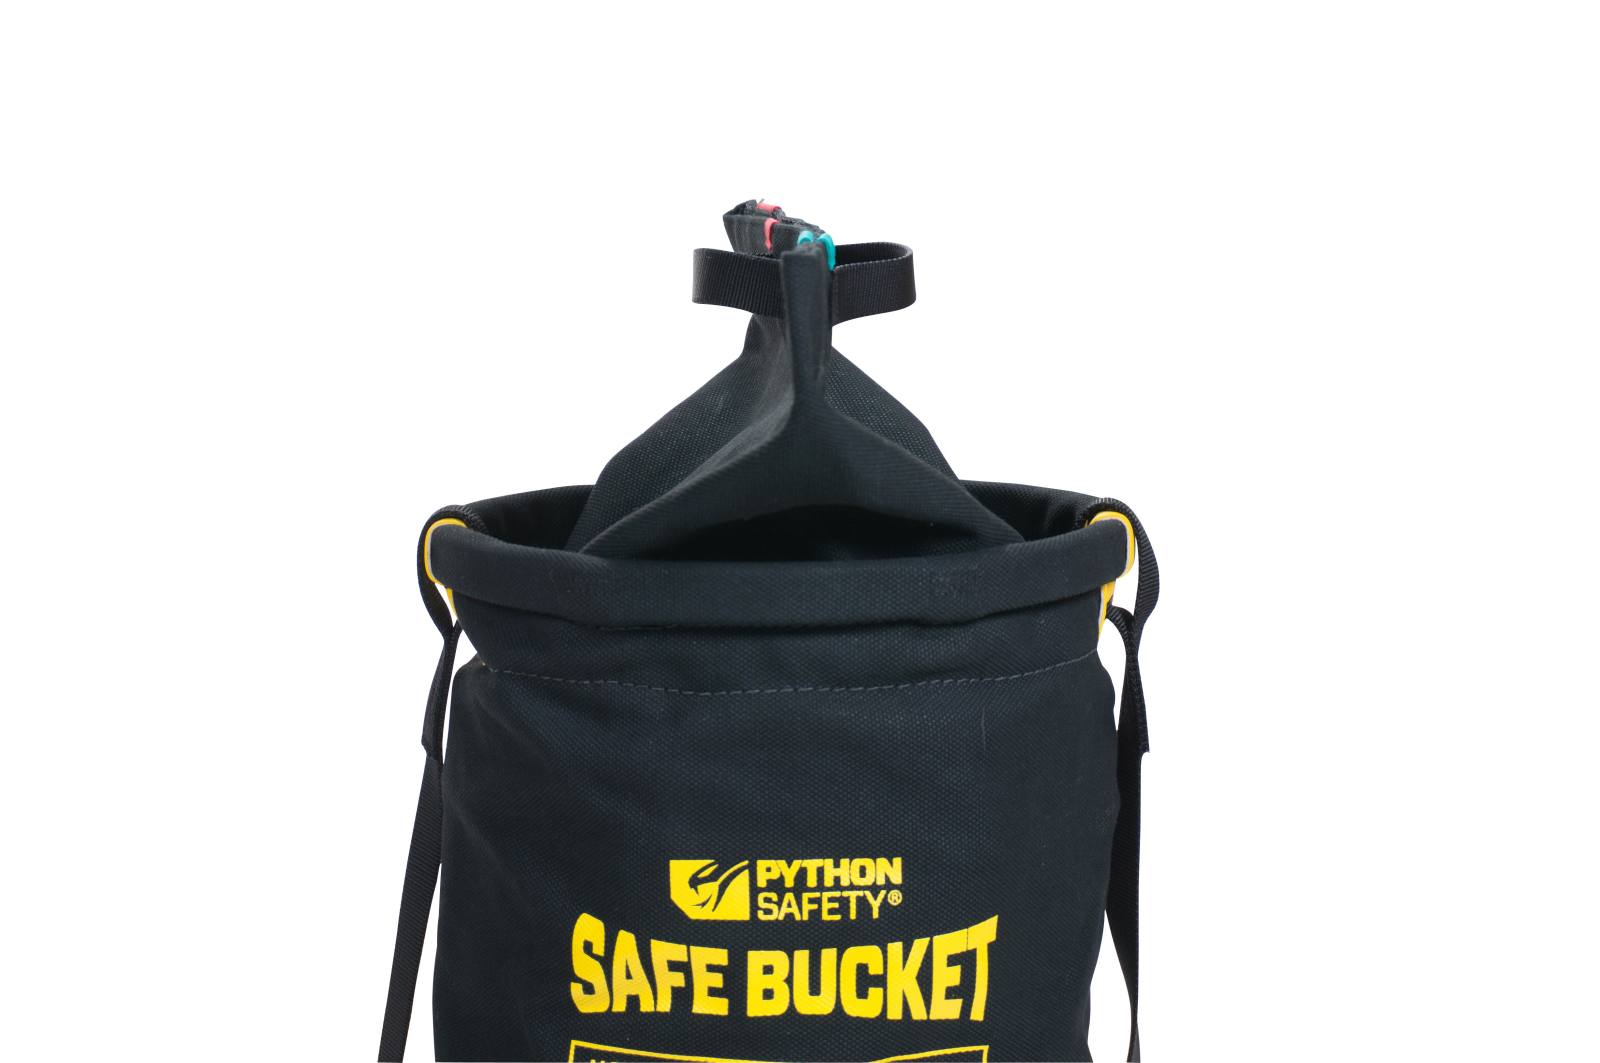 3M DBI-SALA safety transport bag, size: 38 x 32 cm, canvas, puncture-resistant base, hook-and-eye fastening system, carrying strap, various metal eyelets, max. load 45.4 kg, H38 x D32 cm